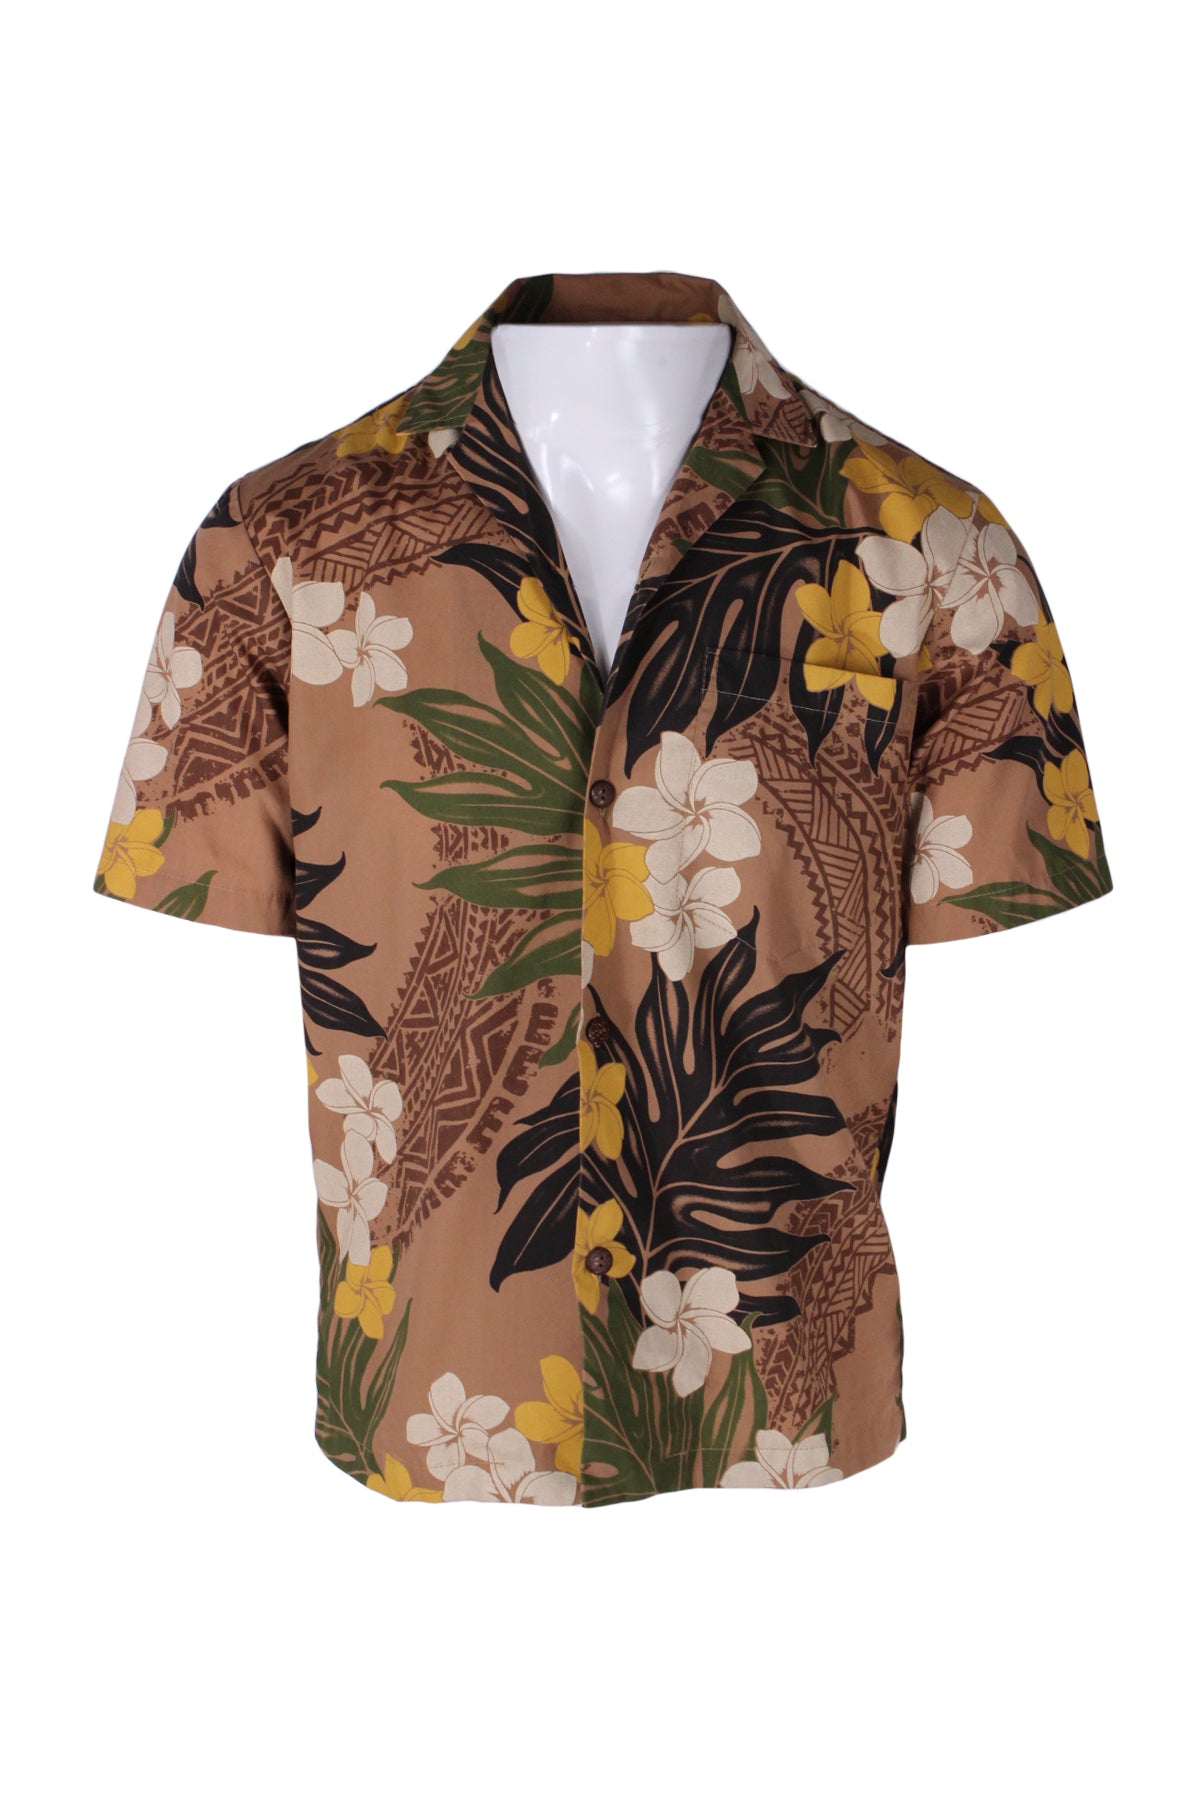 front angle of short sleeve brown floral short sleeve hawaiian shirt on masc mannequin torso. features single pocket over heart, wooden button closure, and notched collar. 